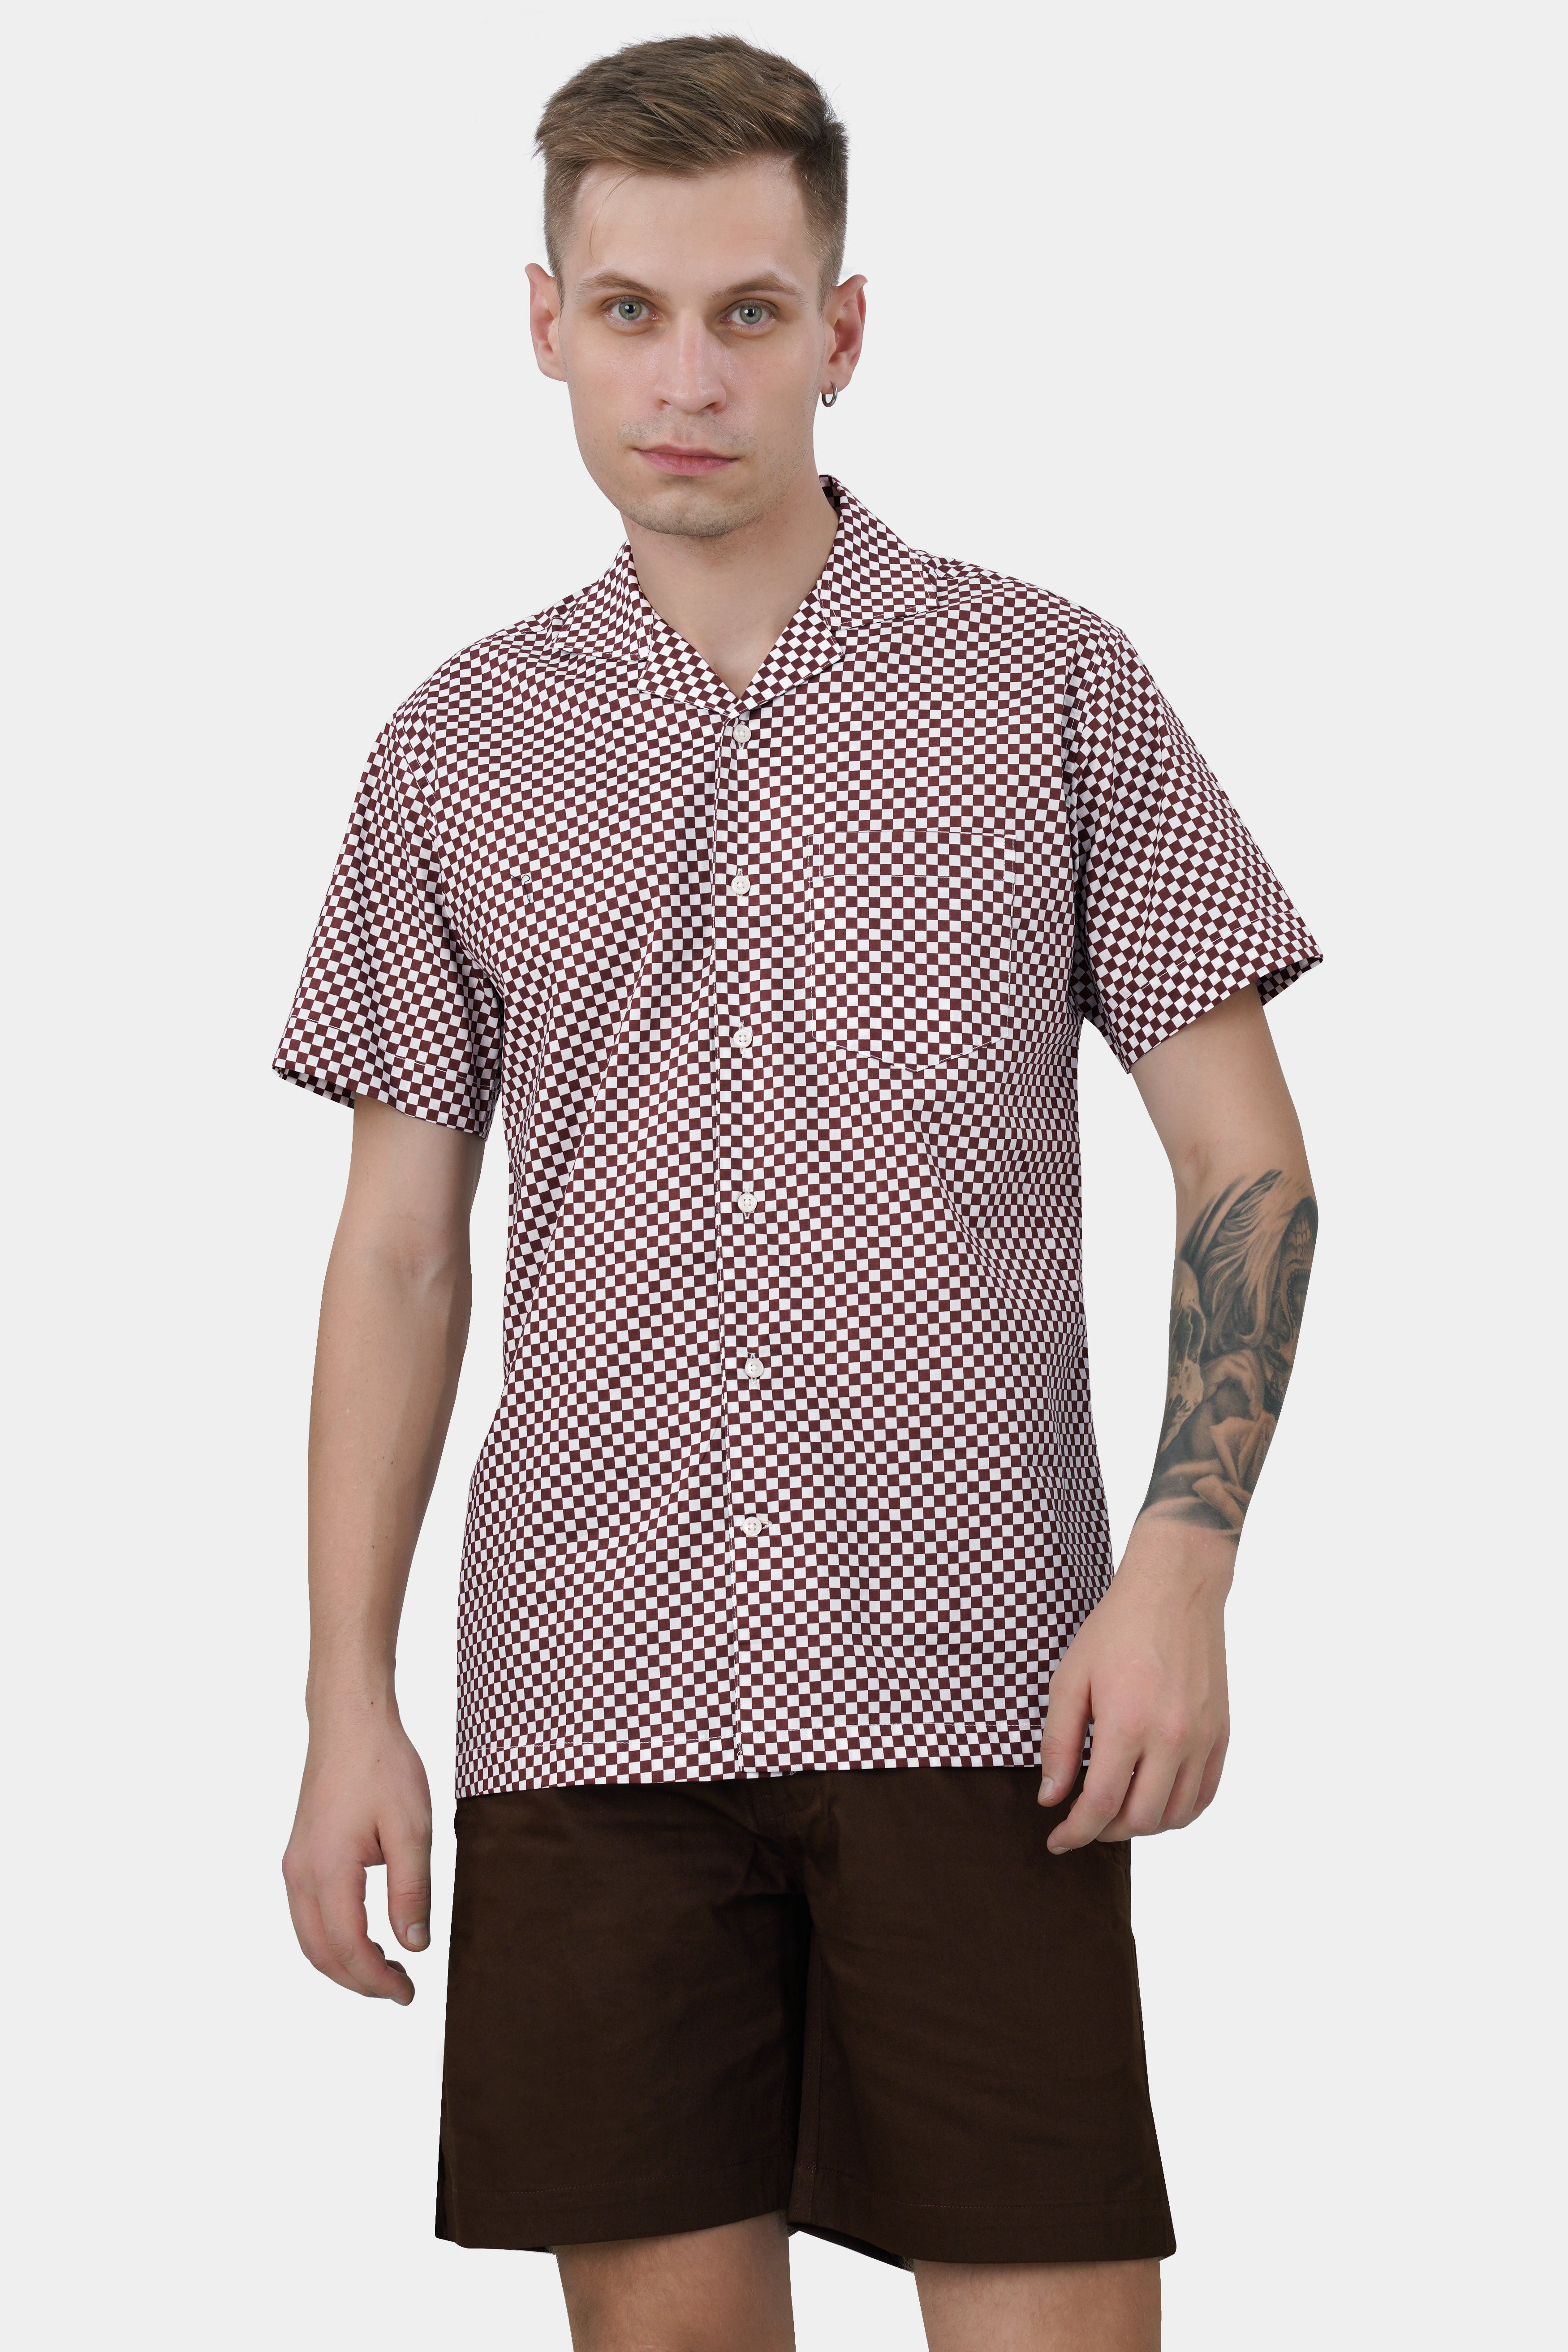 Crater Brown and White Checked Premium Cotton Shirt 11714-CC-SS-38, 11714-CC-SS-39, 11714-CC-SS-40, 11714-CC-SS-42, 11714-CC-SS-44, 11714-CC-SS-46, 11714-CC-SS-48, 11714-CC-SS-50, 11714-CC-SS-52